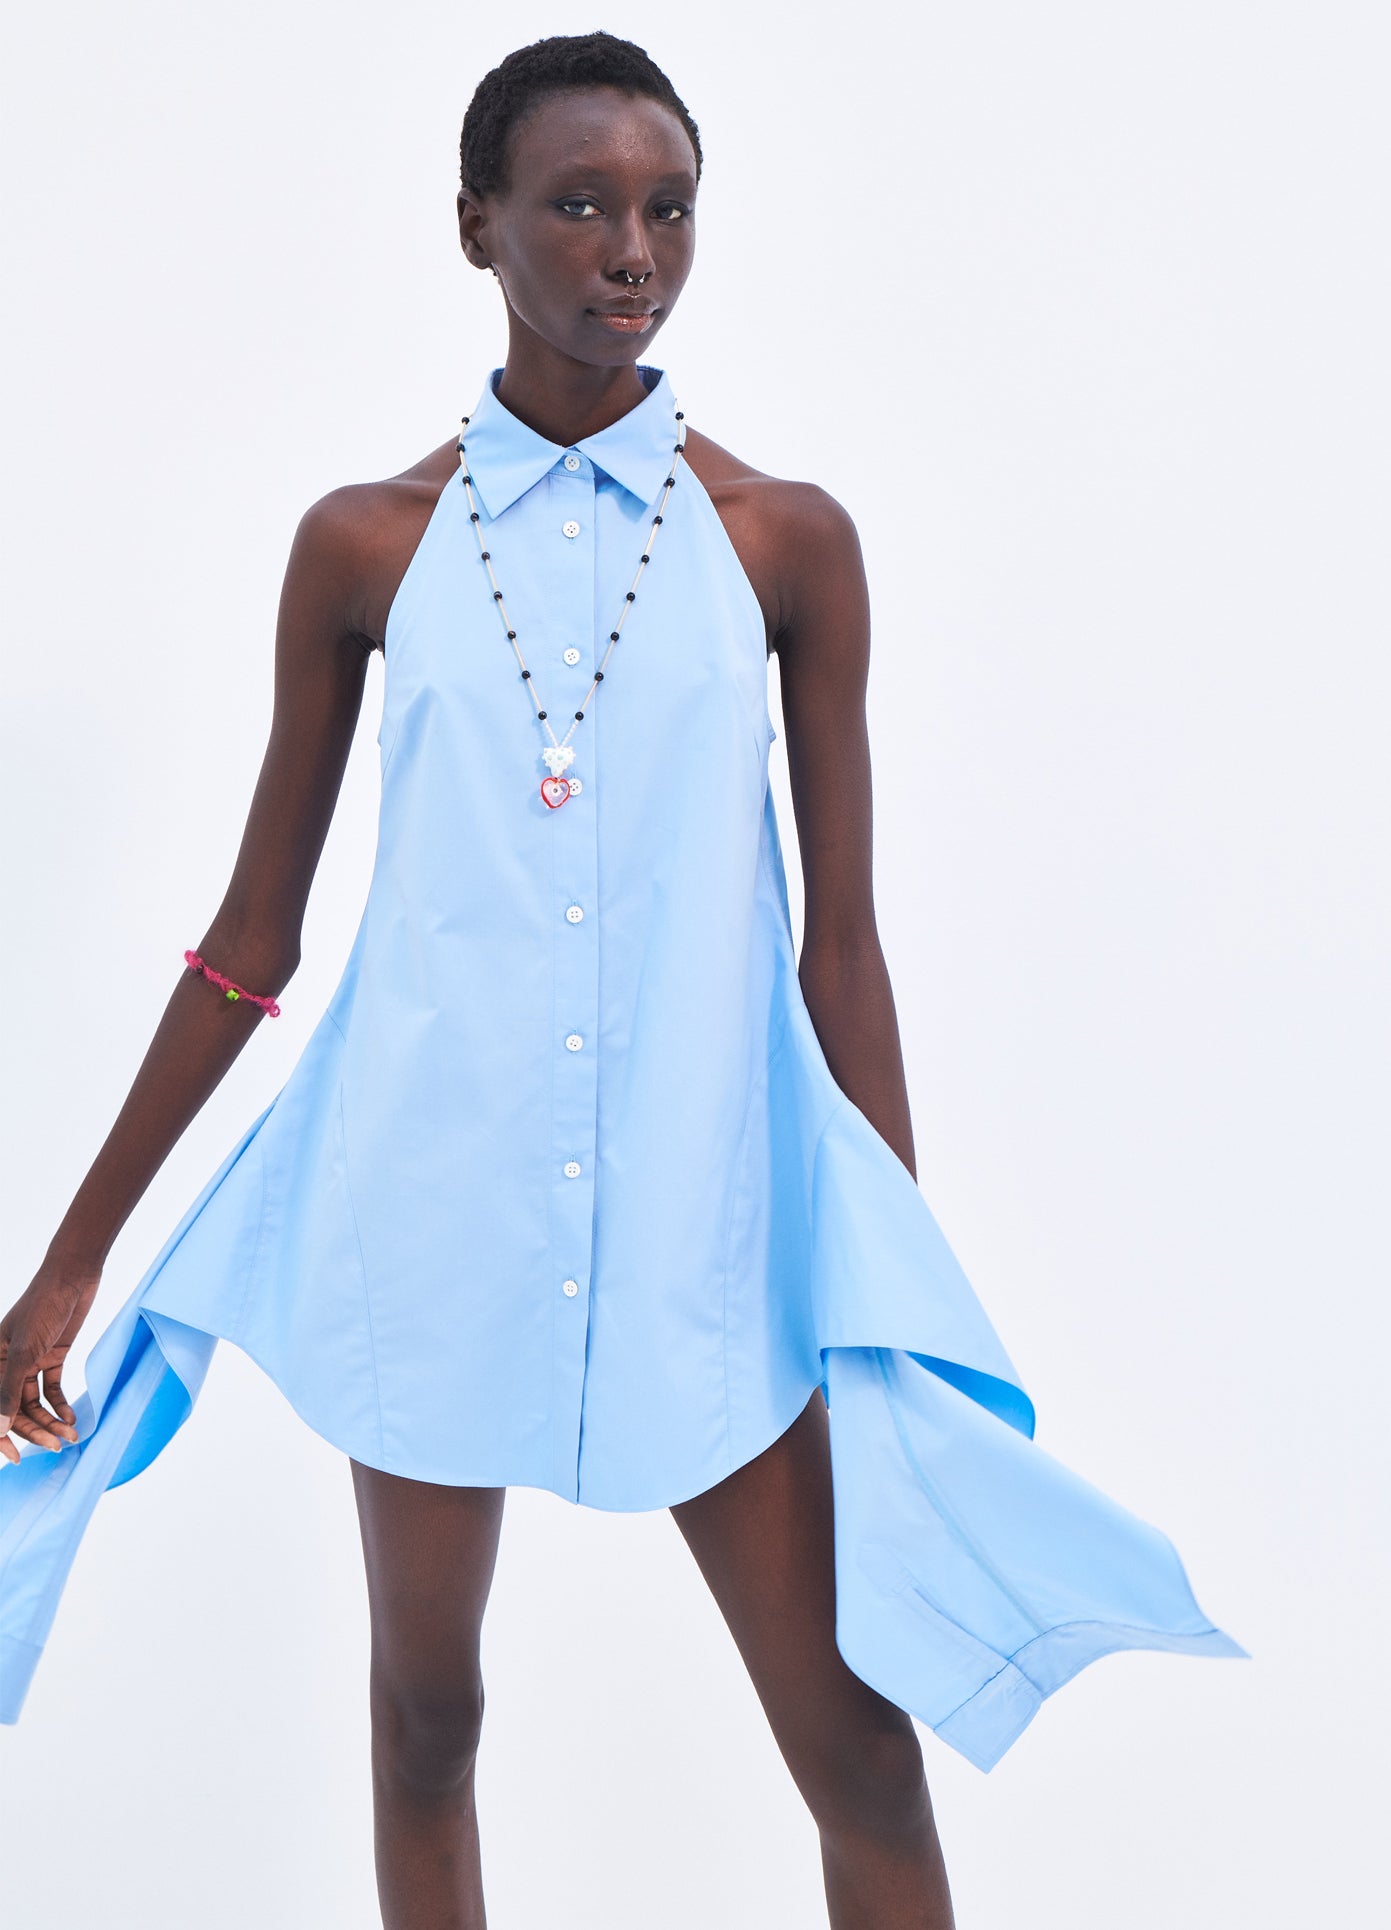 MONSE Sleeveless Deconstructed Halter Shirt in Blue on model styled front view